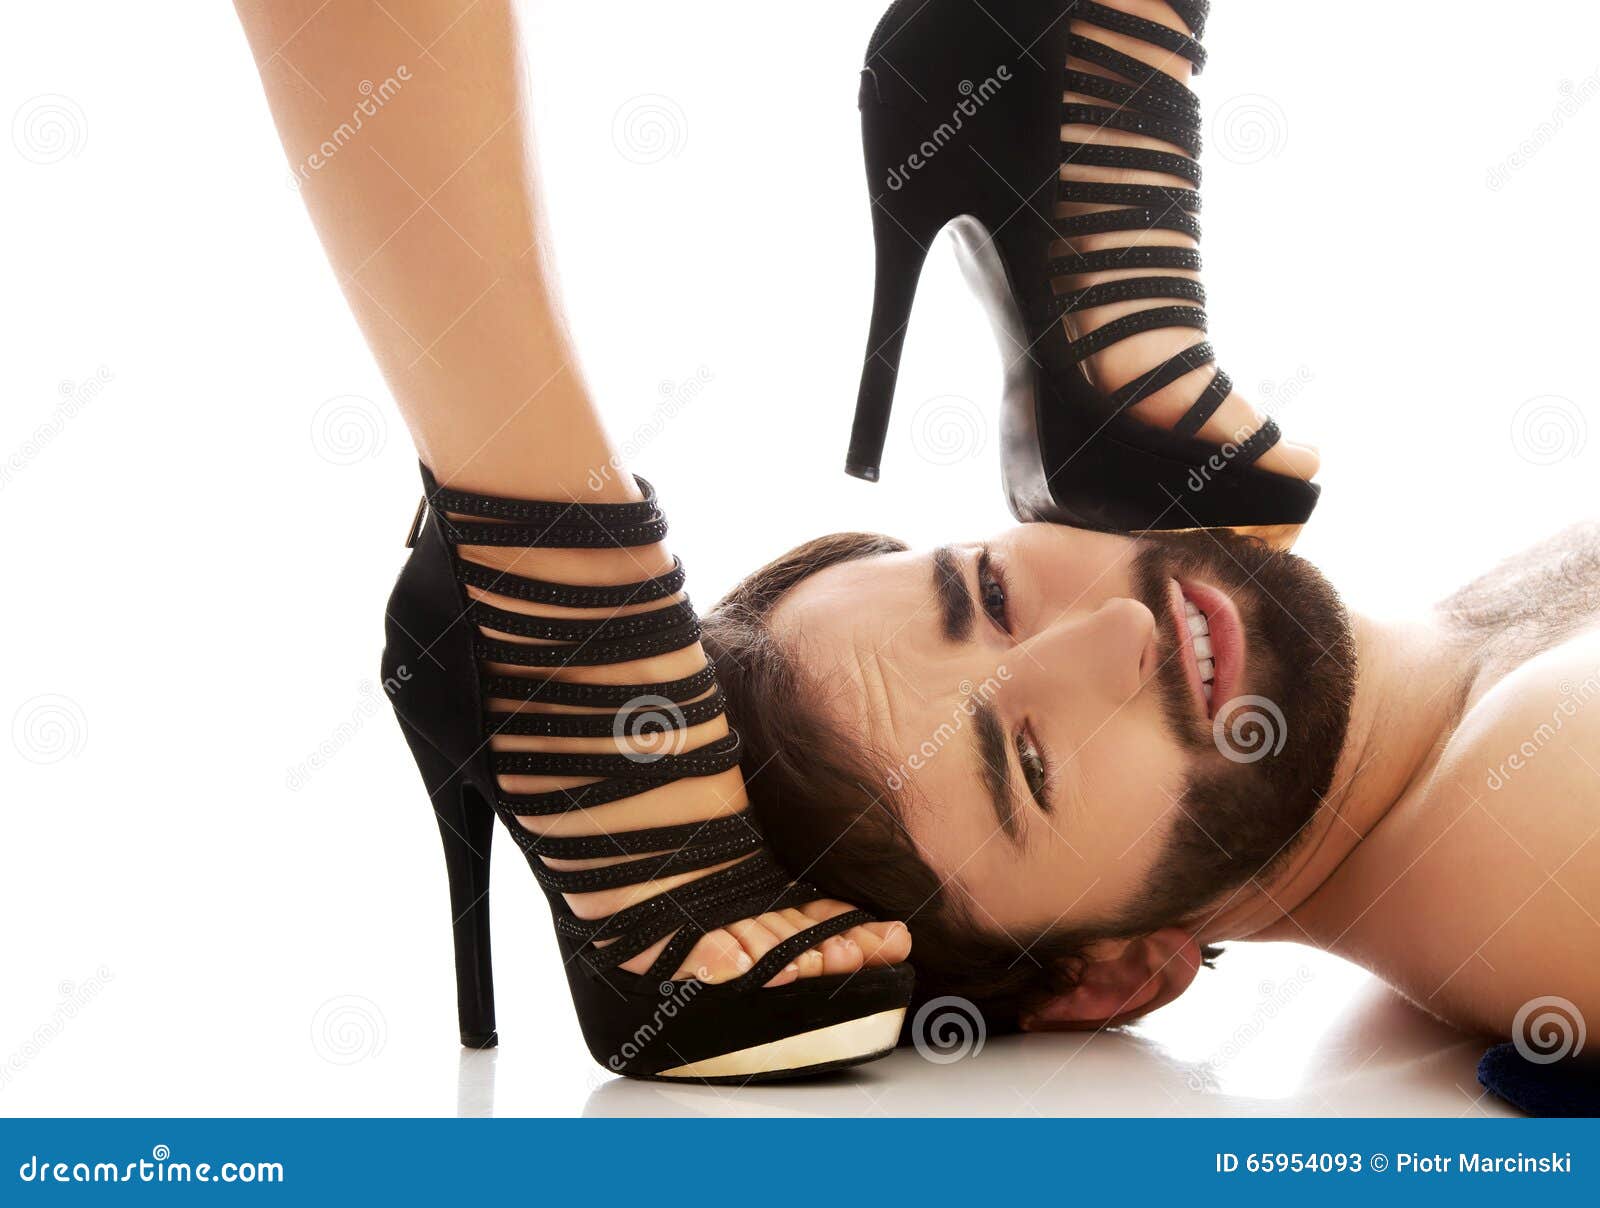 Women stepping on mens dicks with high heels